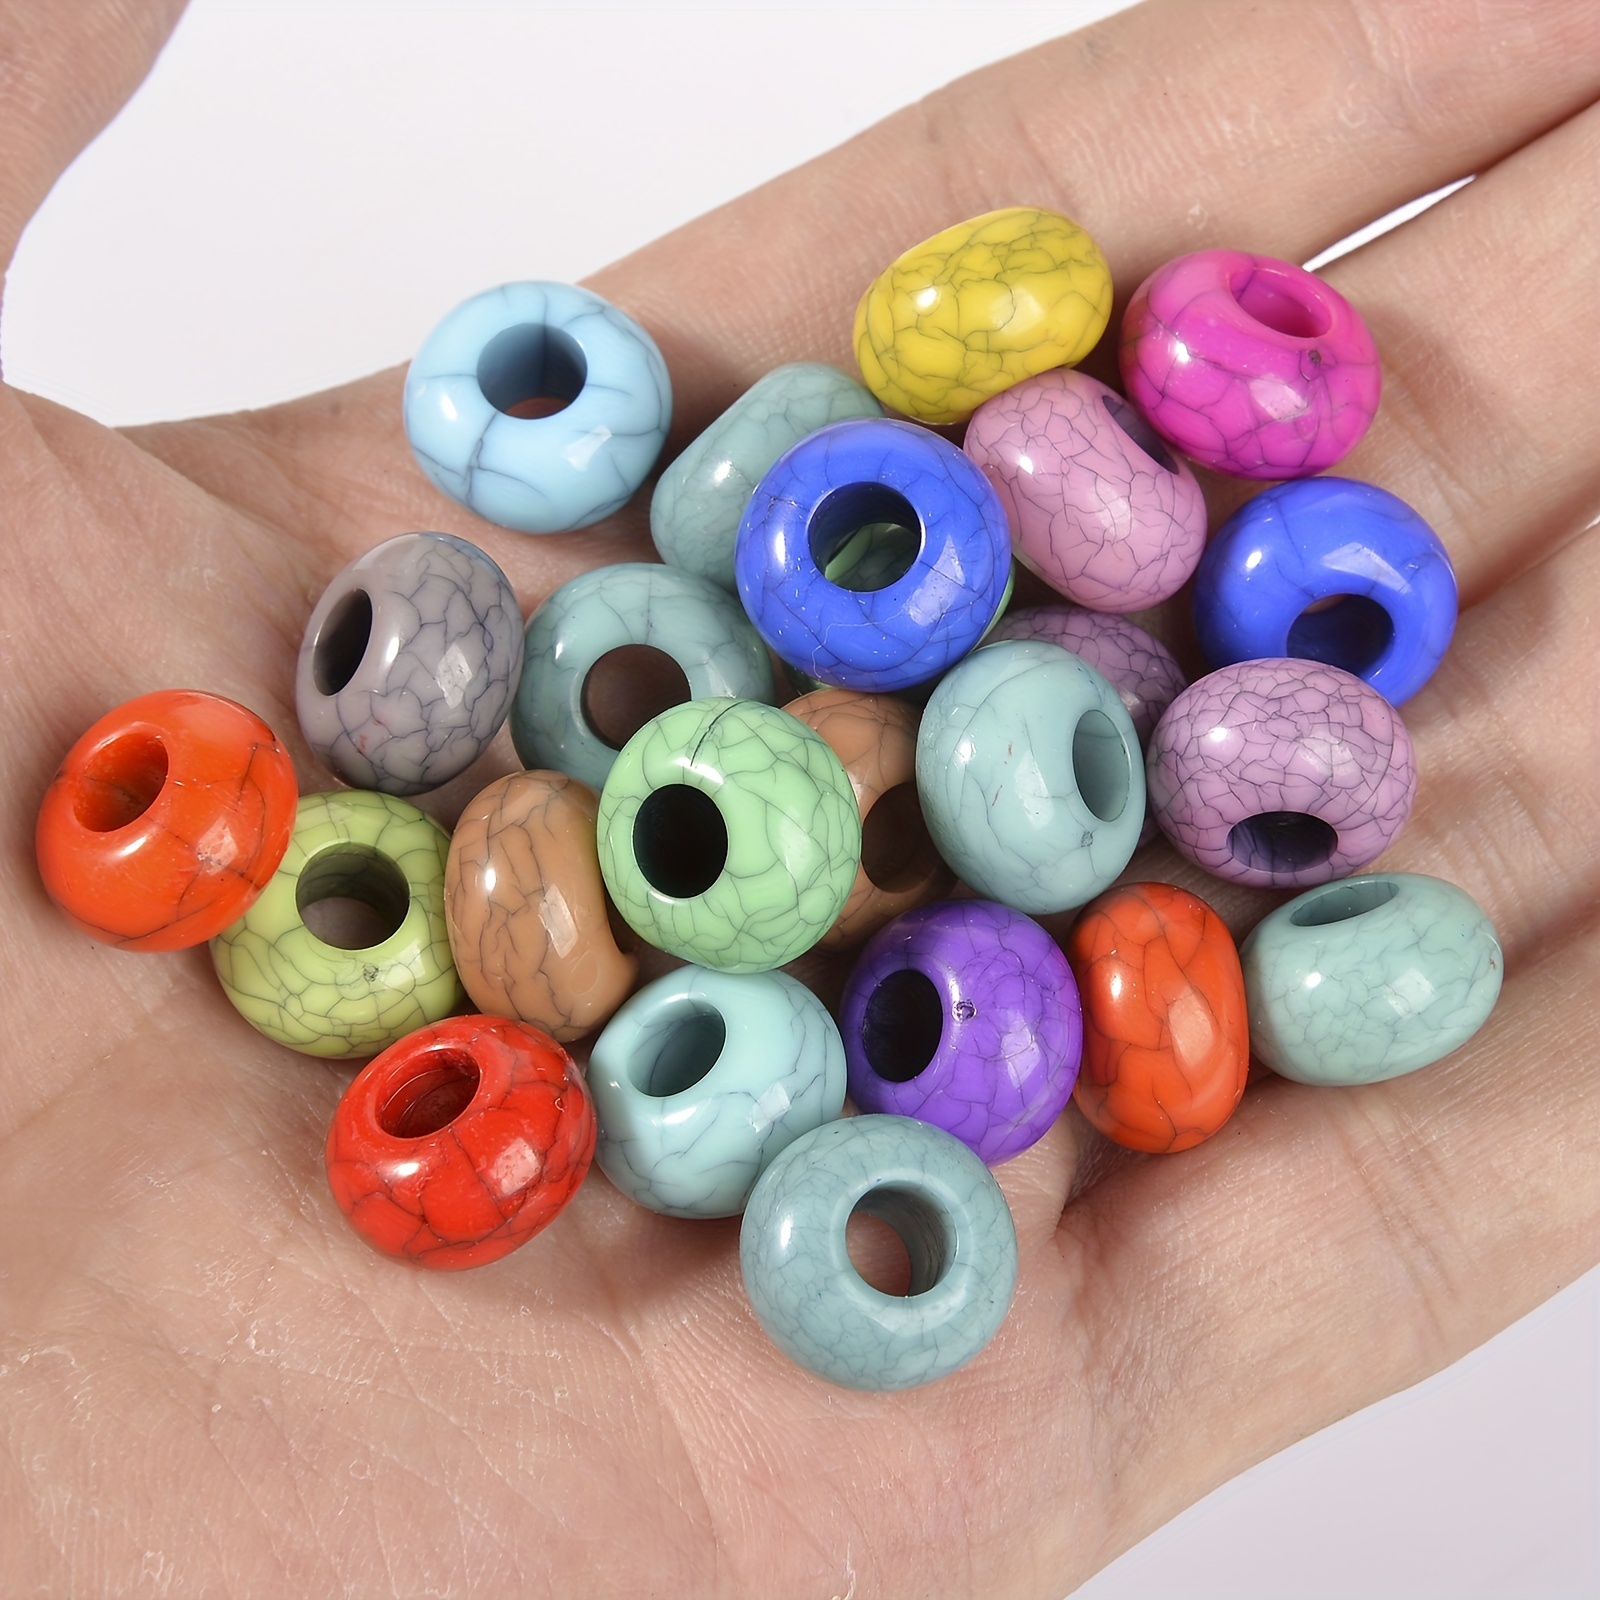 20 Pcs 10mm Fluorescent Glass Beads Big Hole Charms DIY Round Glass Beads Strands for Jewelry Craft Making Mixed Colors, Adult Unisex